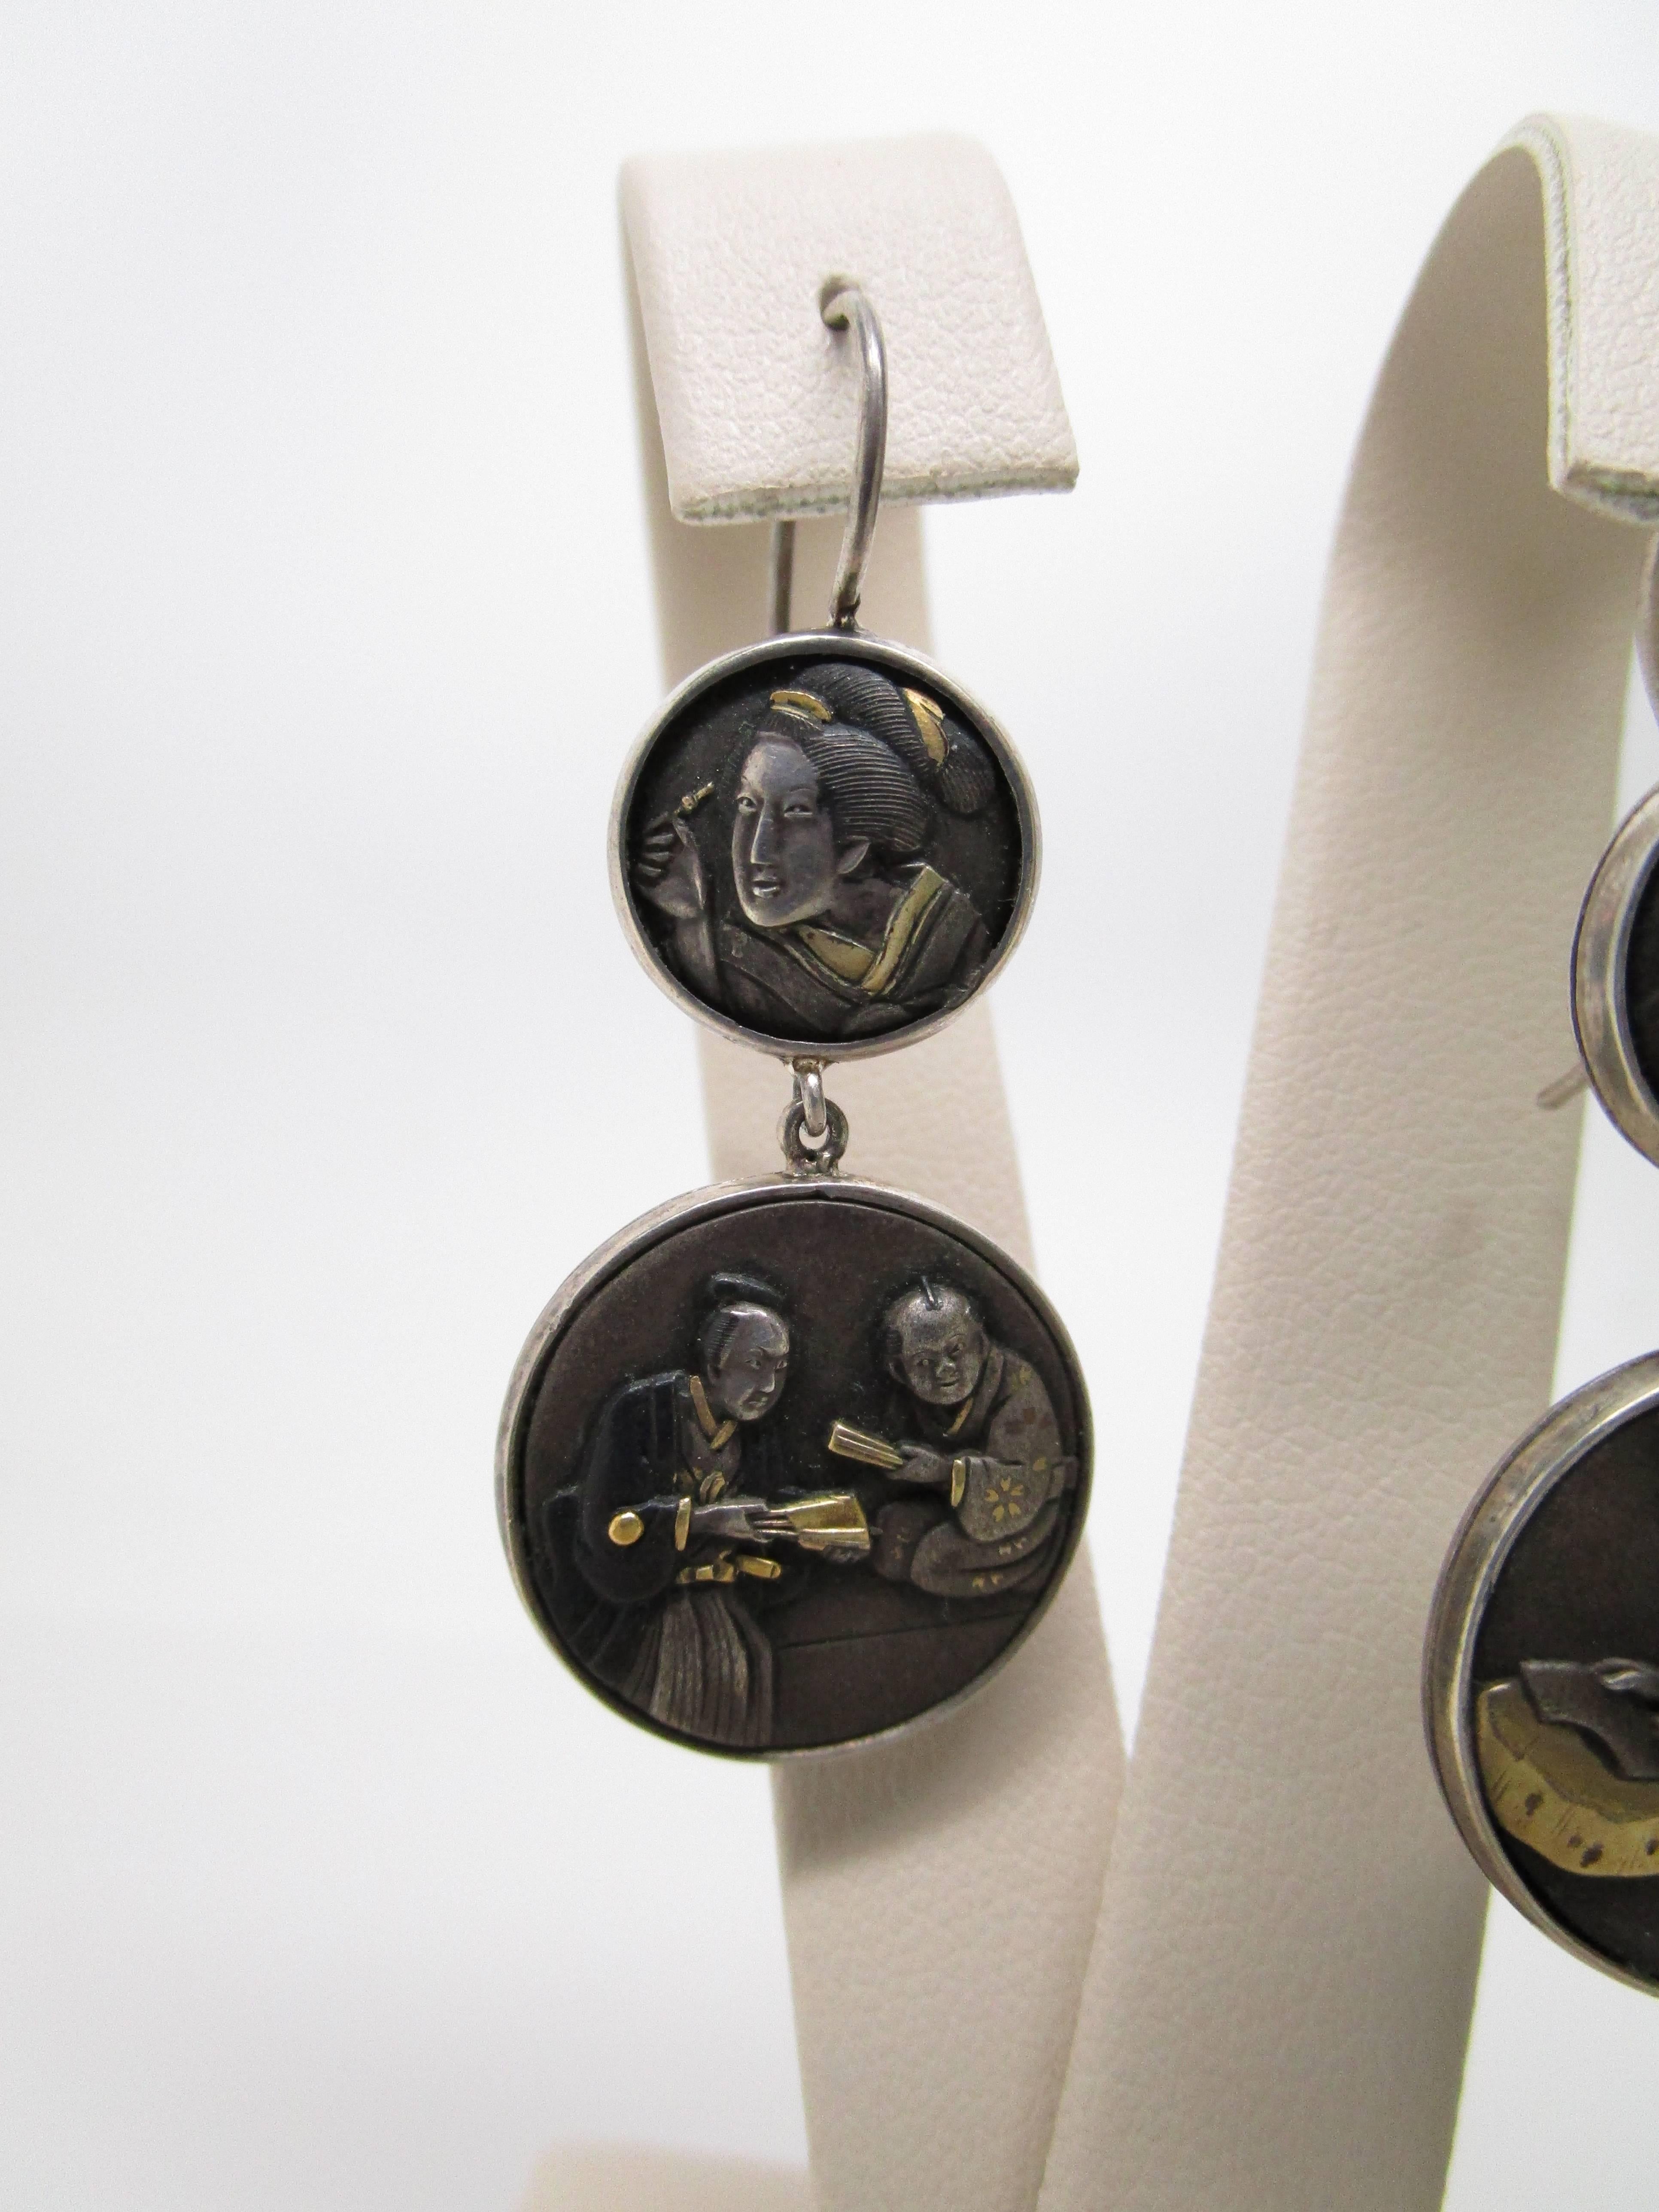 This pair of Victorian Japanese Shakudo Earrings feature two panels depicting life in Japan of old. Over one hundred years old, these panels feature beautiful scenes in the art form known as Japanese Shakudo. When Japan opened its borders in the